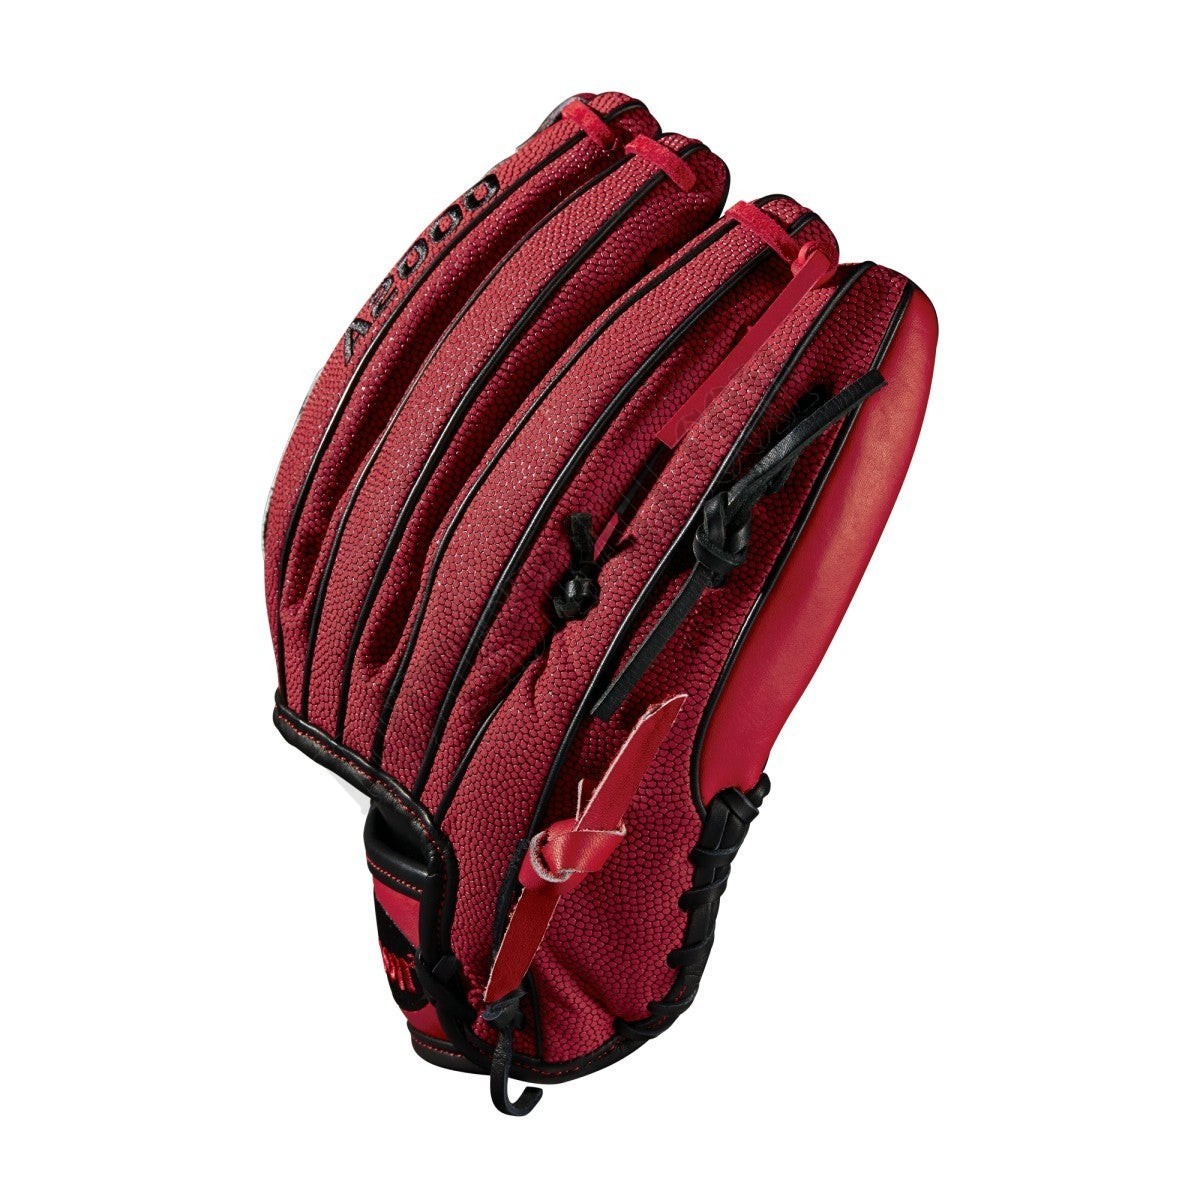 2018 A2000 MA14 SuperSkin GM 12.25" Pitcher's Fastpitch Glove - Left Hand Throw ● Wilson Promotions - -3